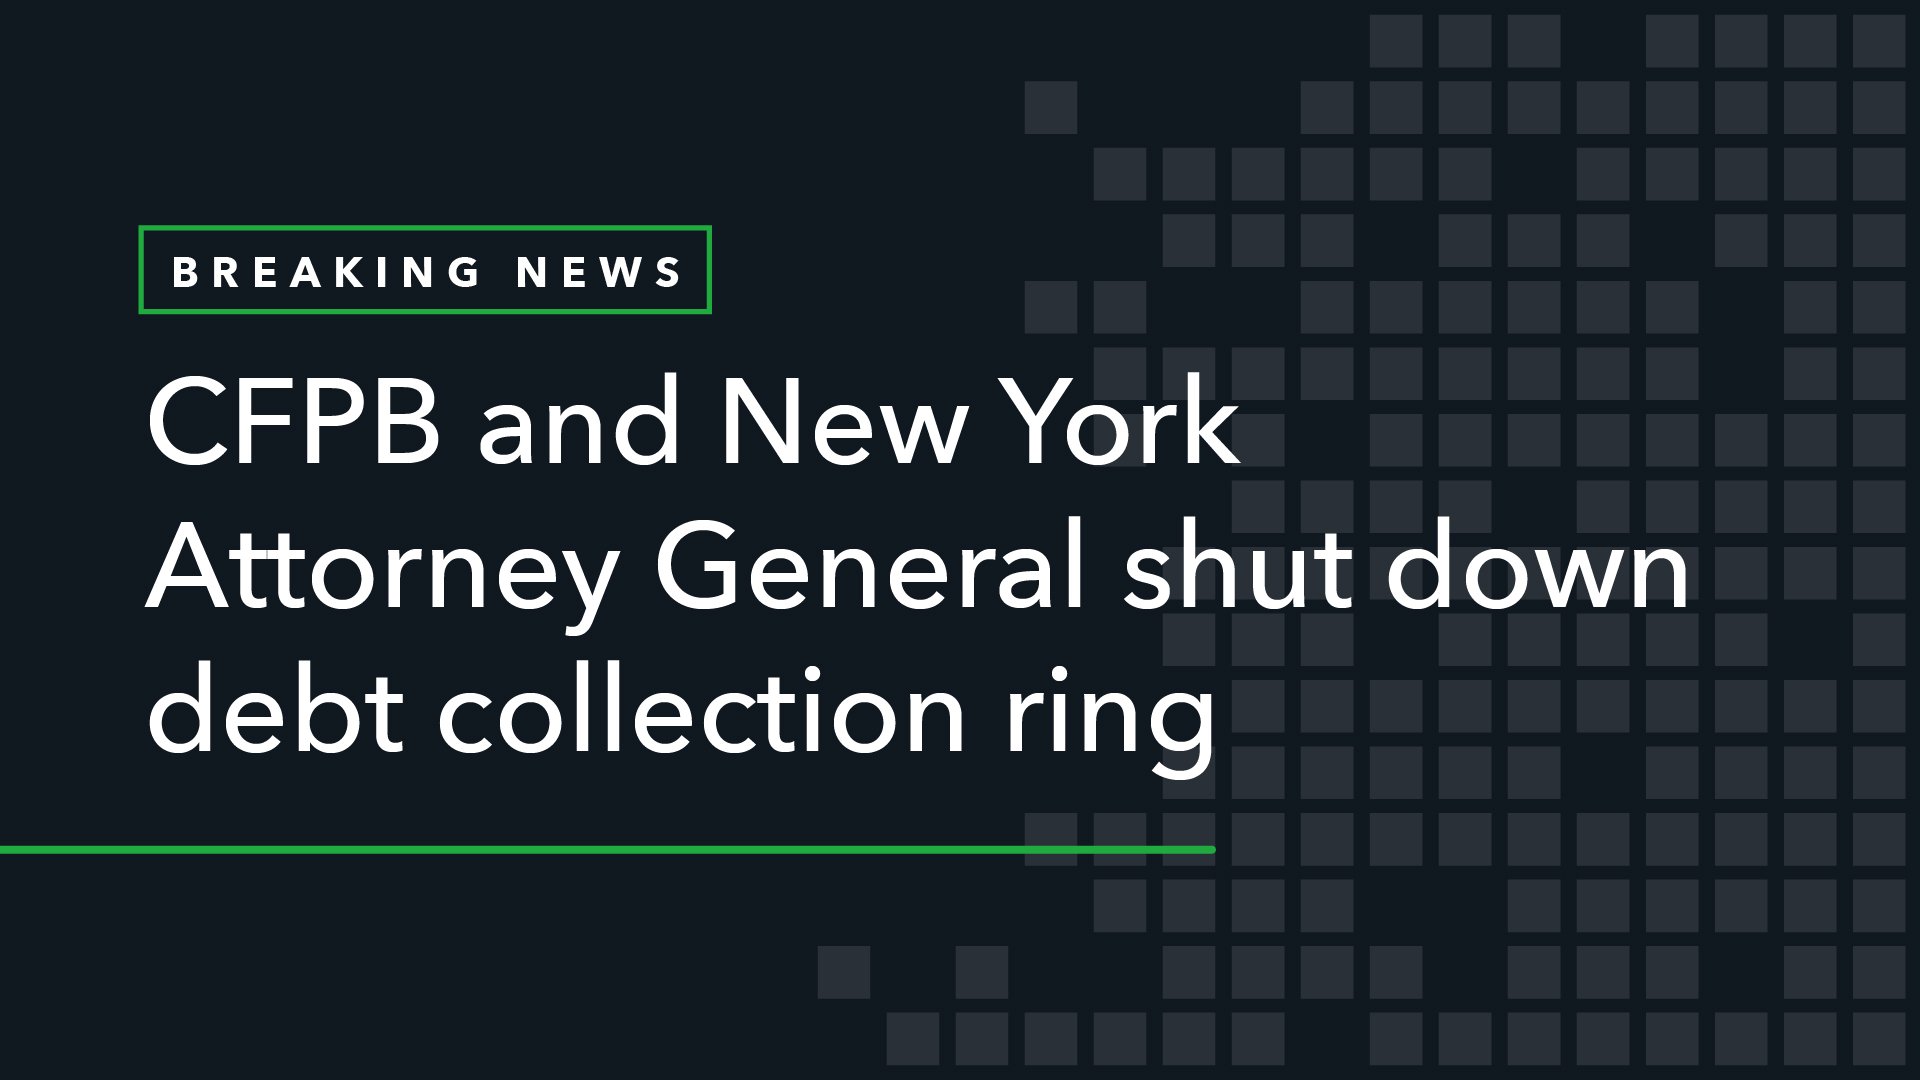 CFPB and New York Attorney General Shut Down Debt Collection Ring